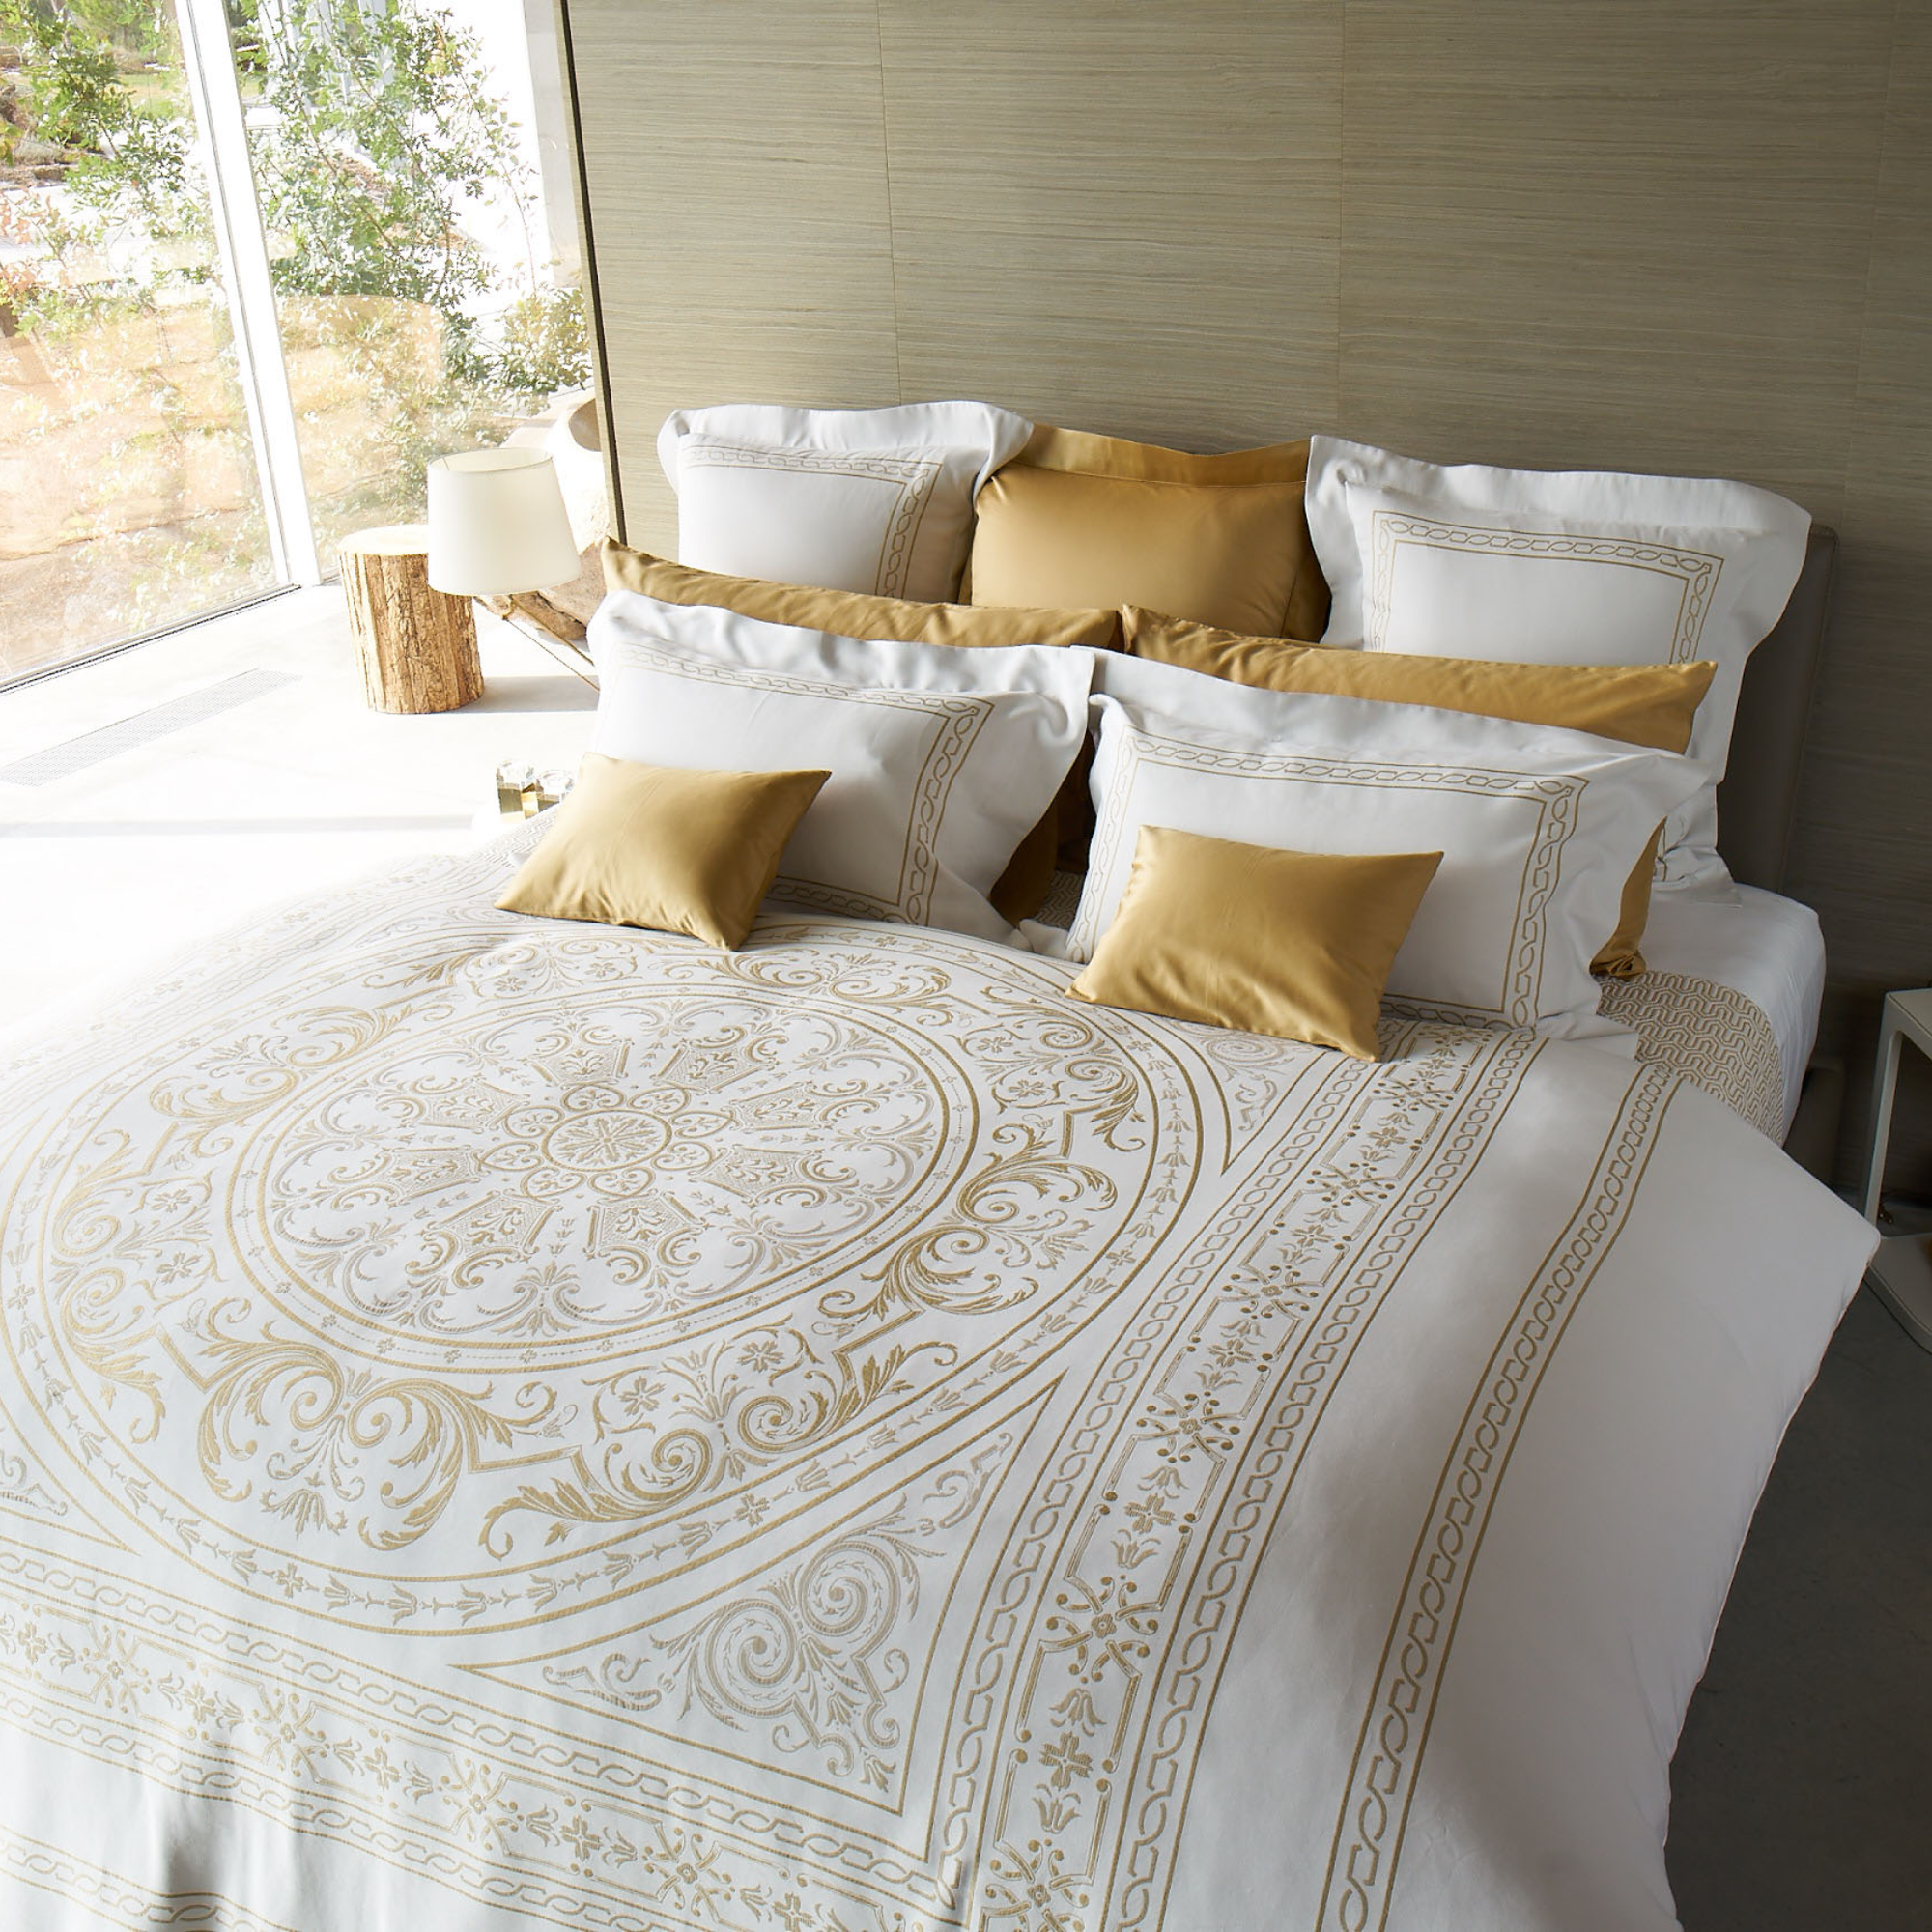 Lifestyle Shot of Celso de Lemos Versailles Bedding in Brightly Lit Room